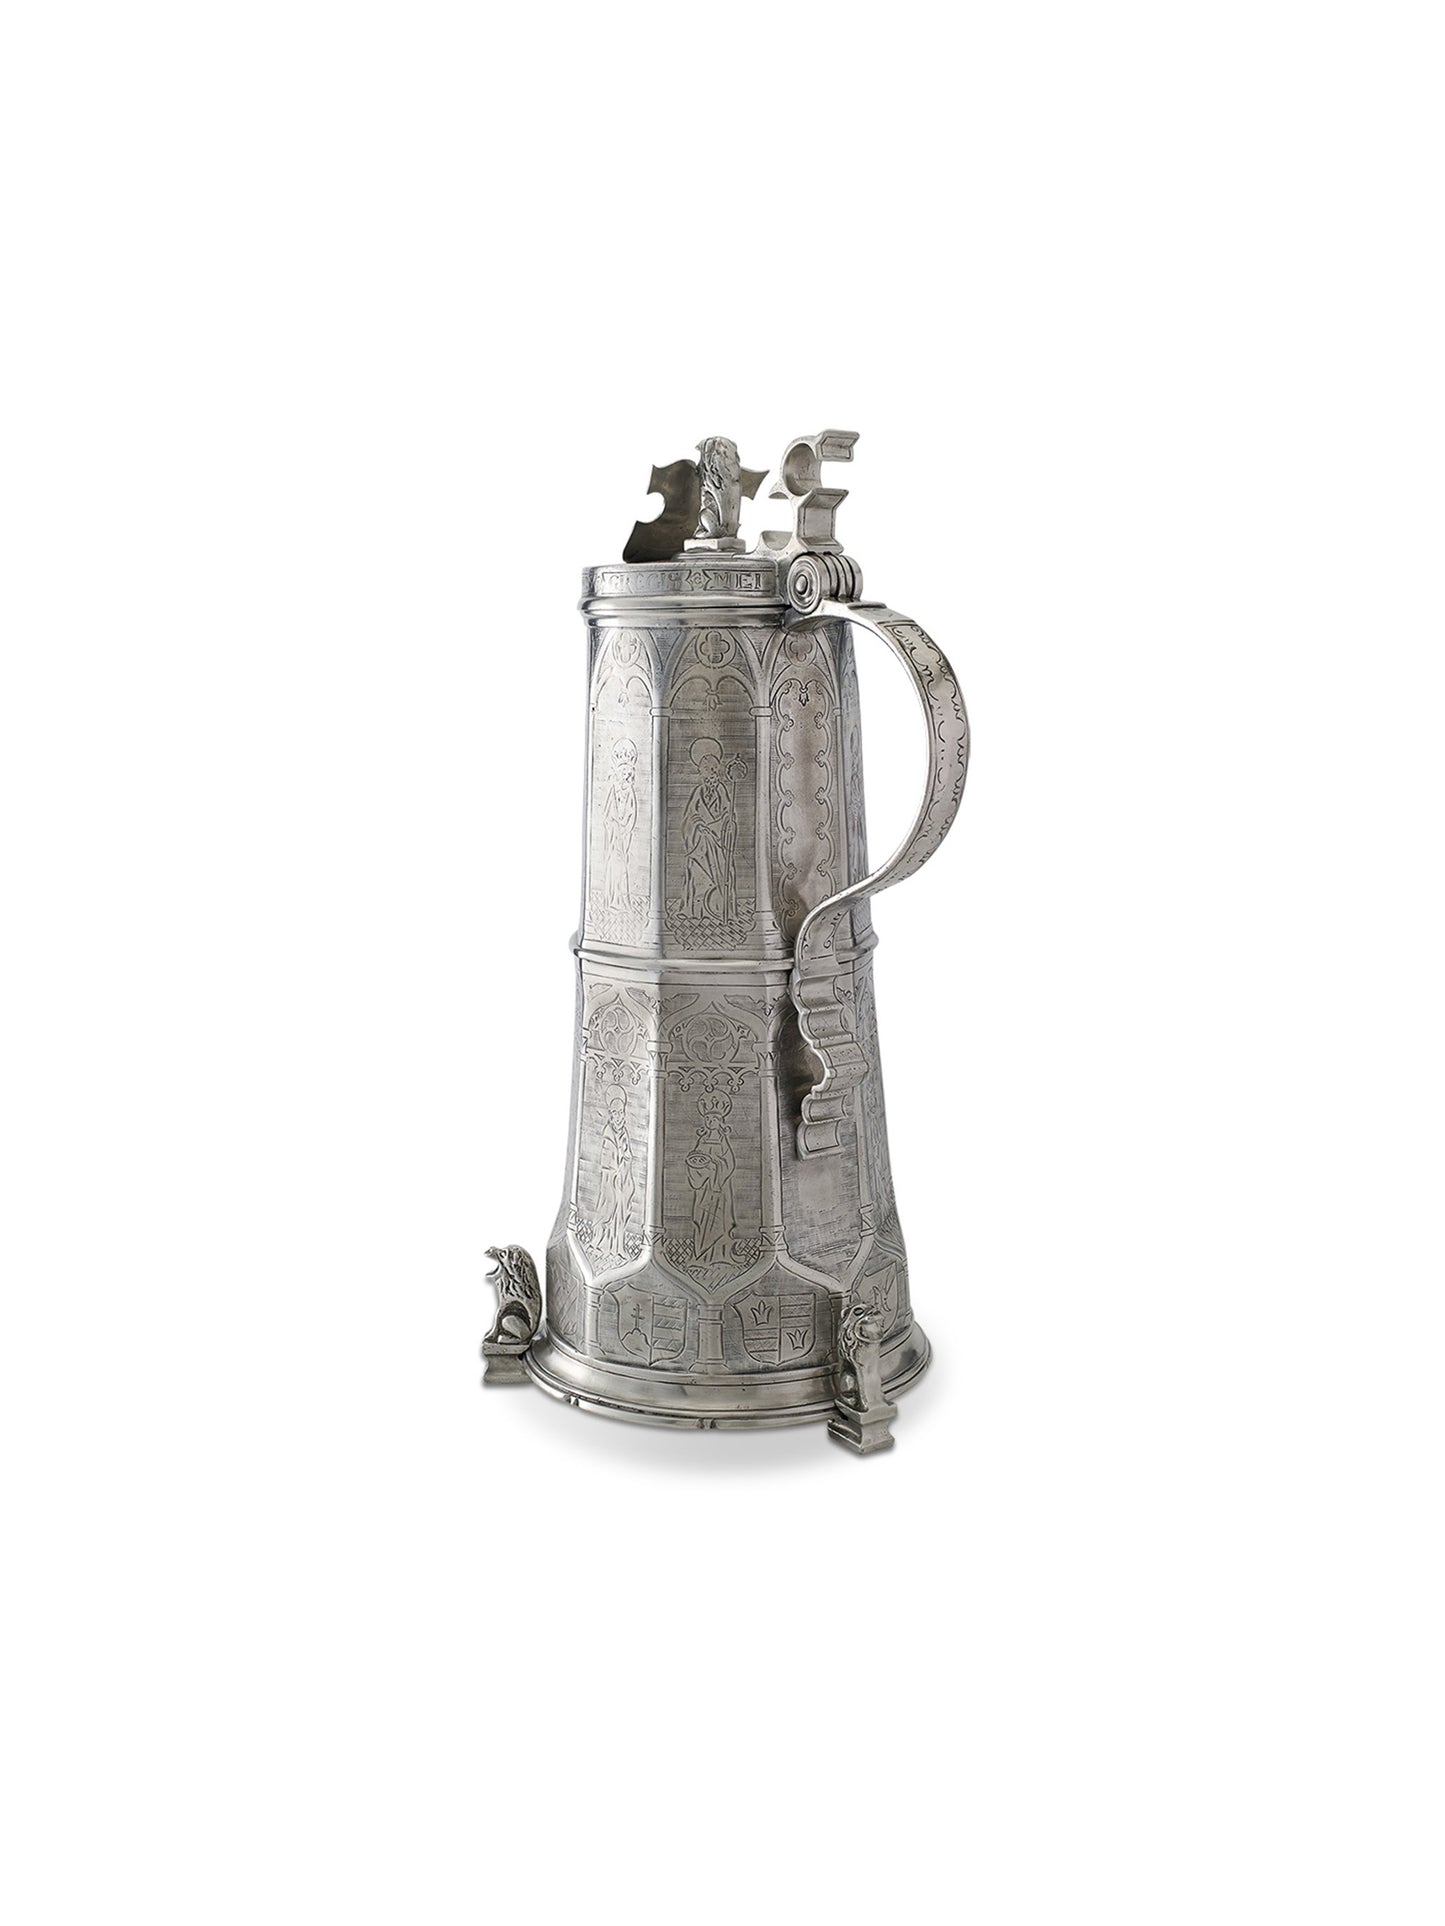 MATCH Pewter Engraved Beer Stein Weston Table